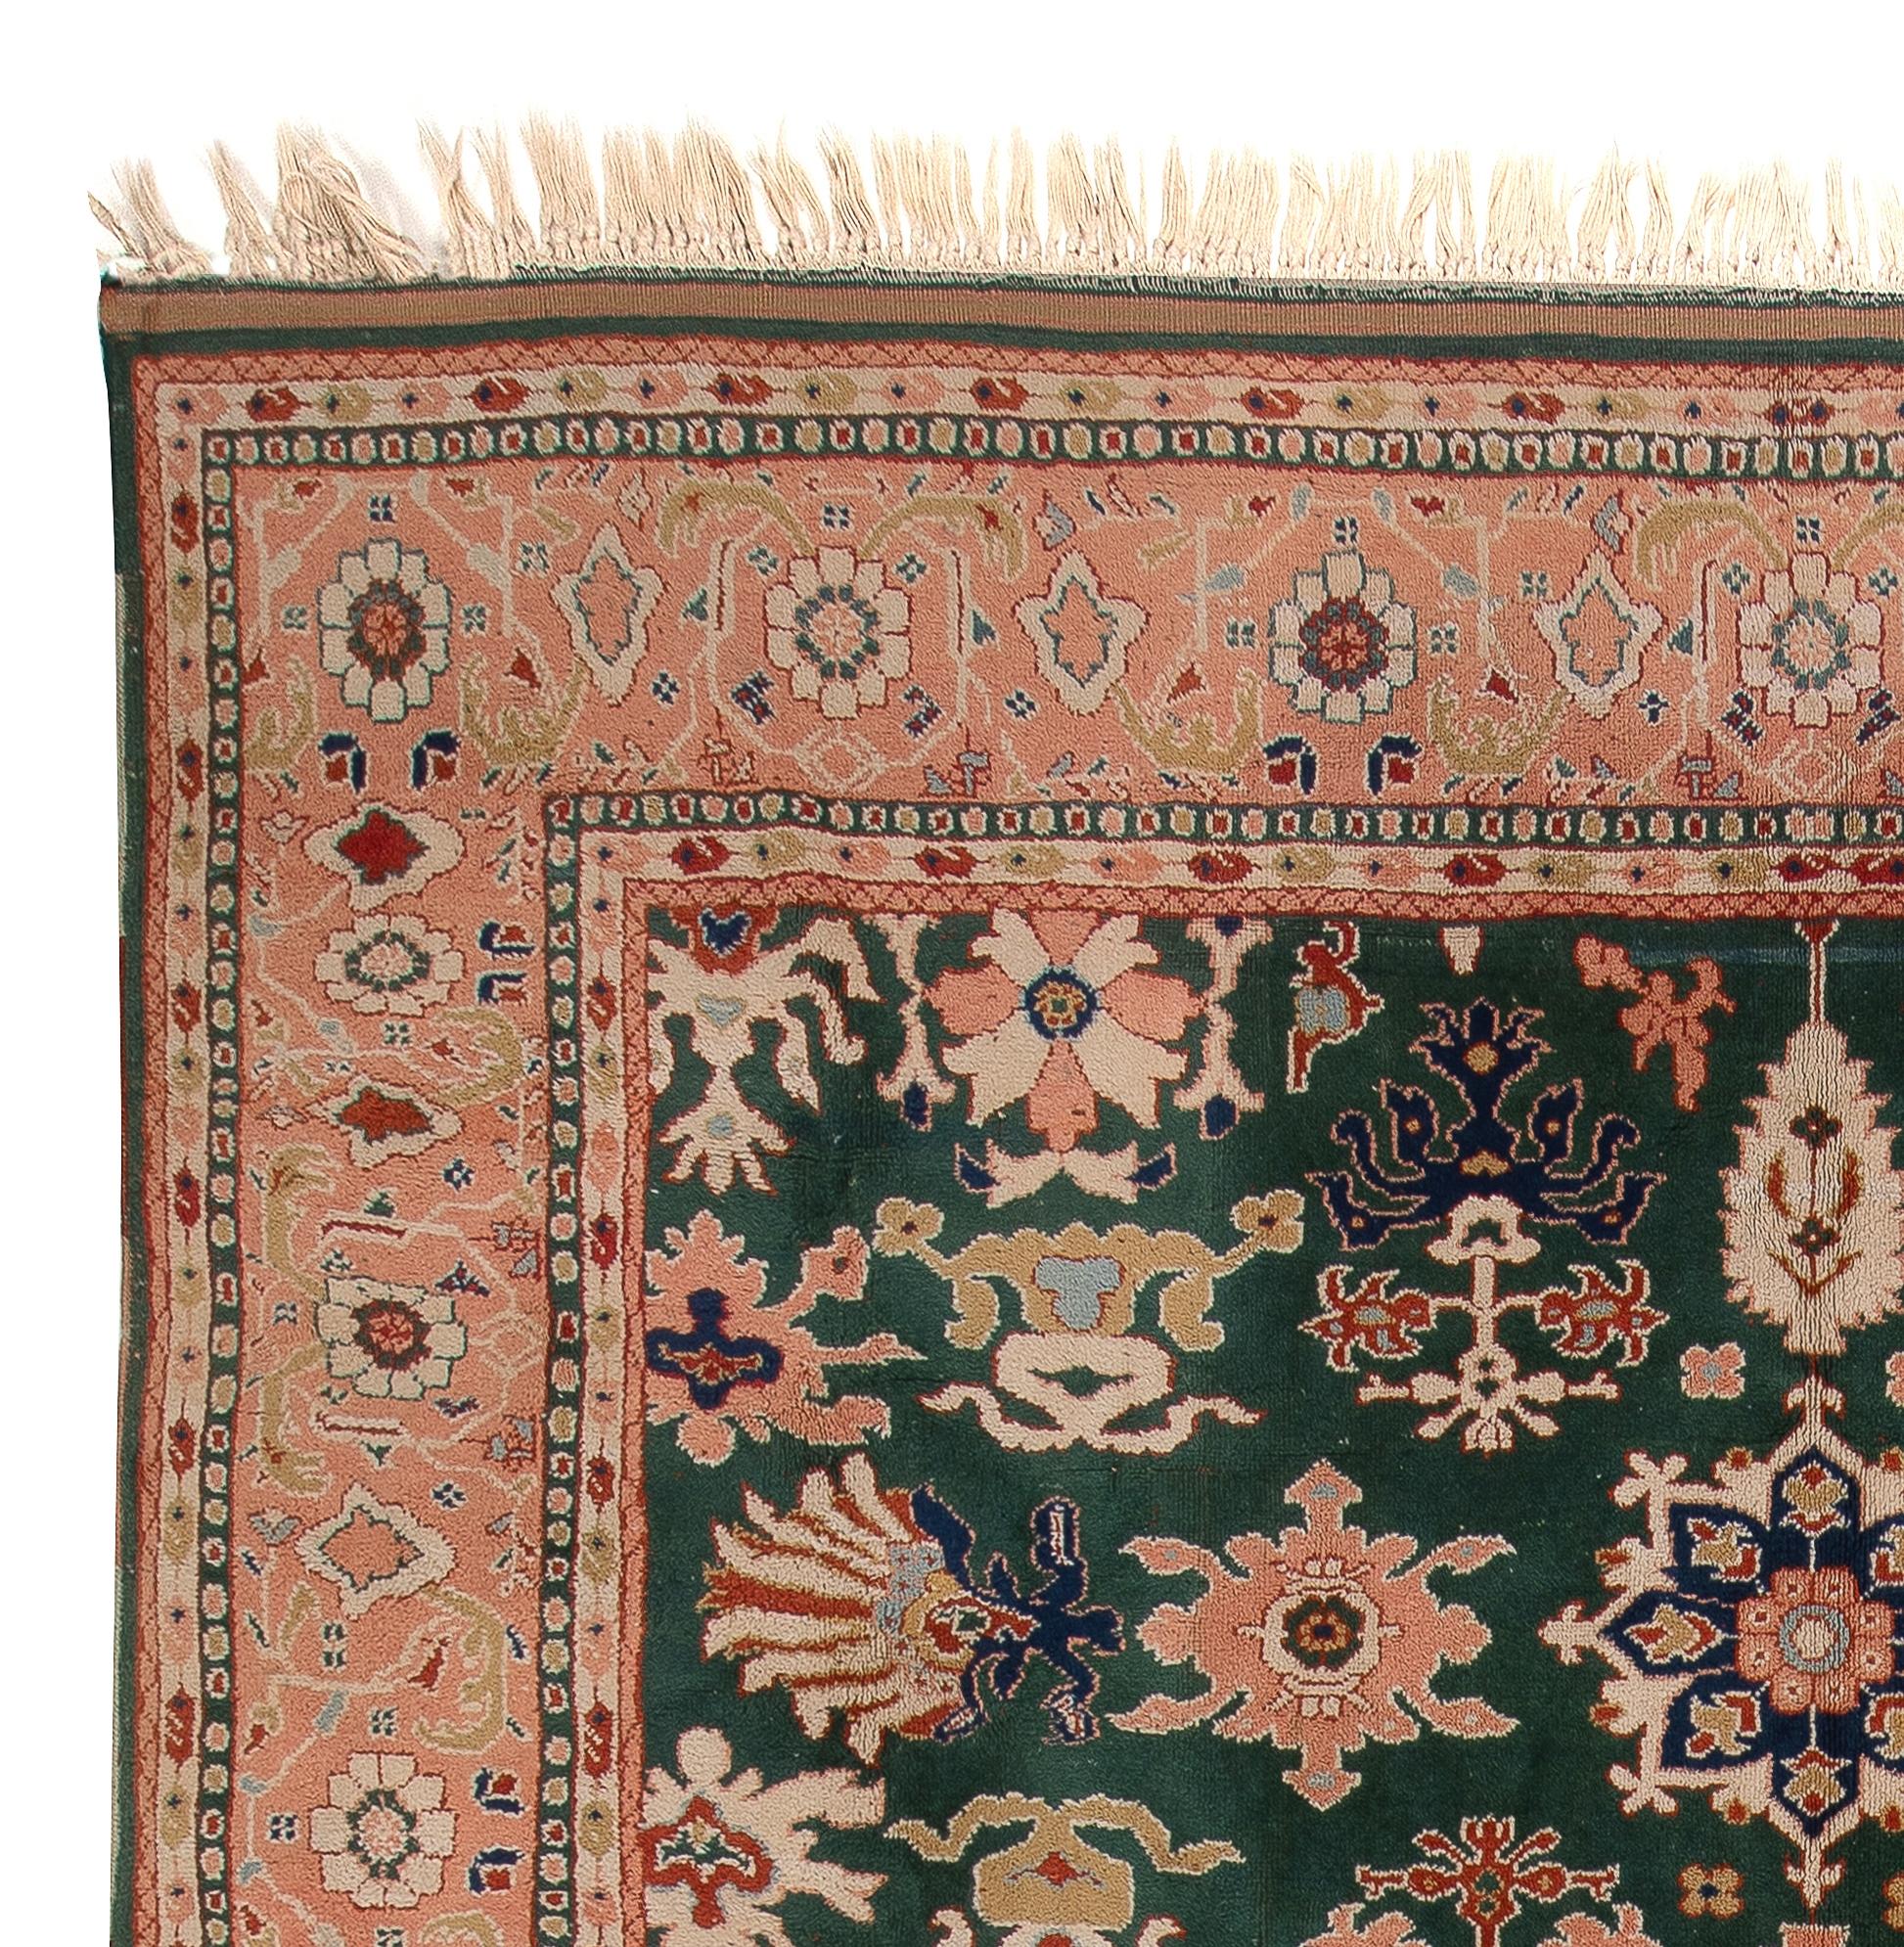 This exquisite hand-knotted Turkish rug features a beautiful color palette of glowing peach and deep, dark emerald green which together create a soft, delightful contrast and give off a sense of warmth. Its field is densely decorated with free